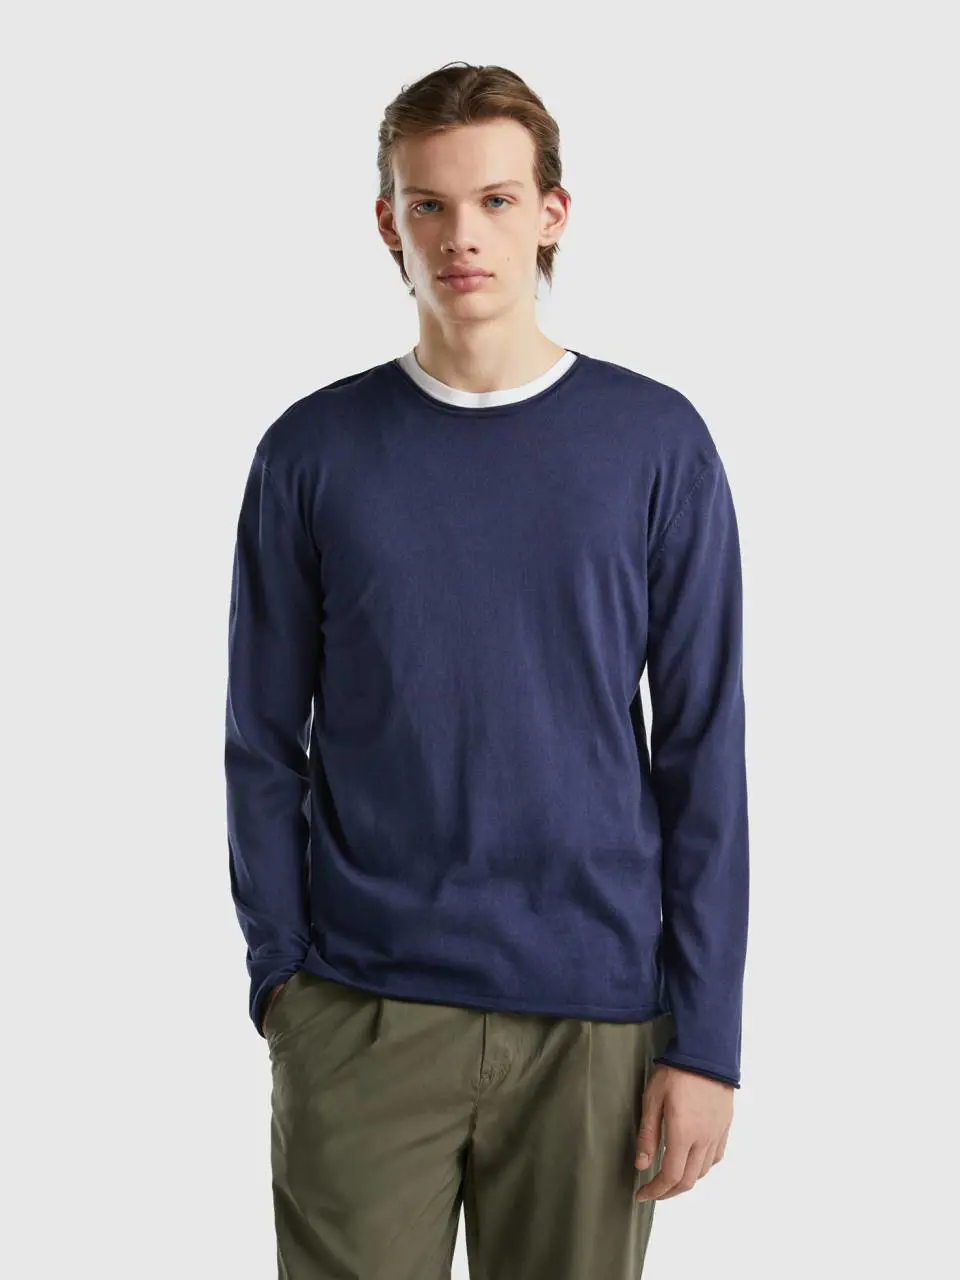 Benetton sweater with raw cut finish. 1